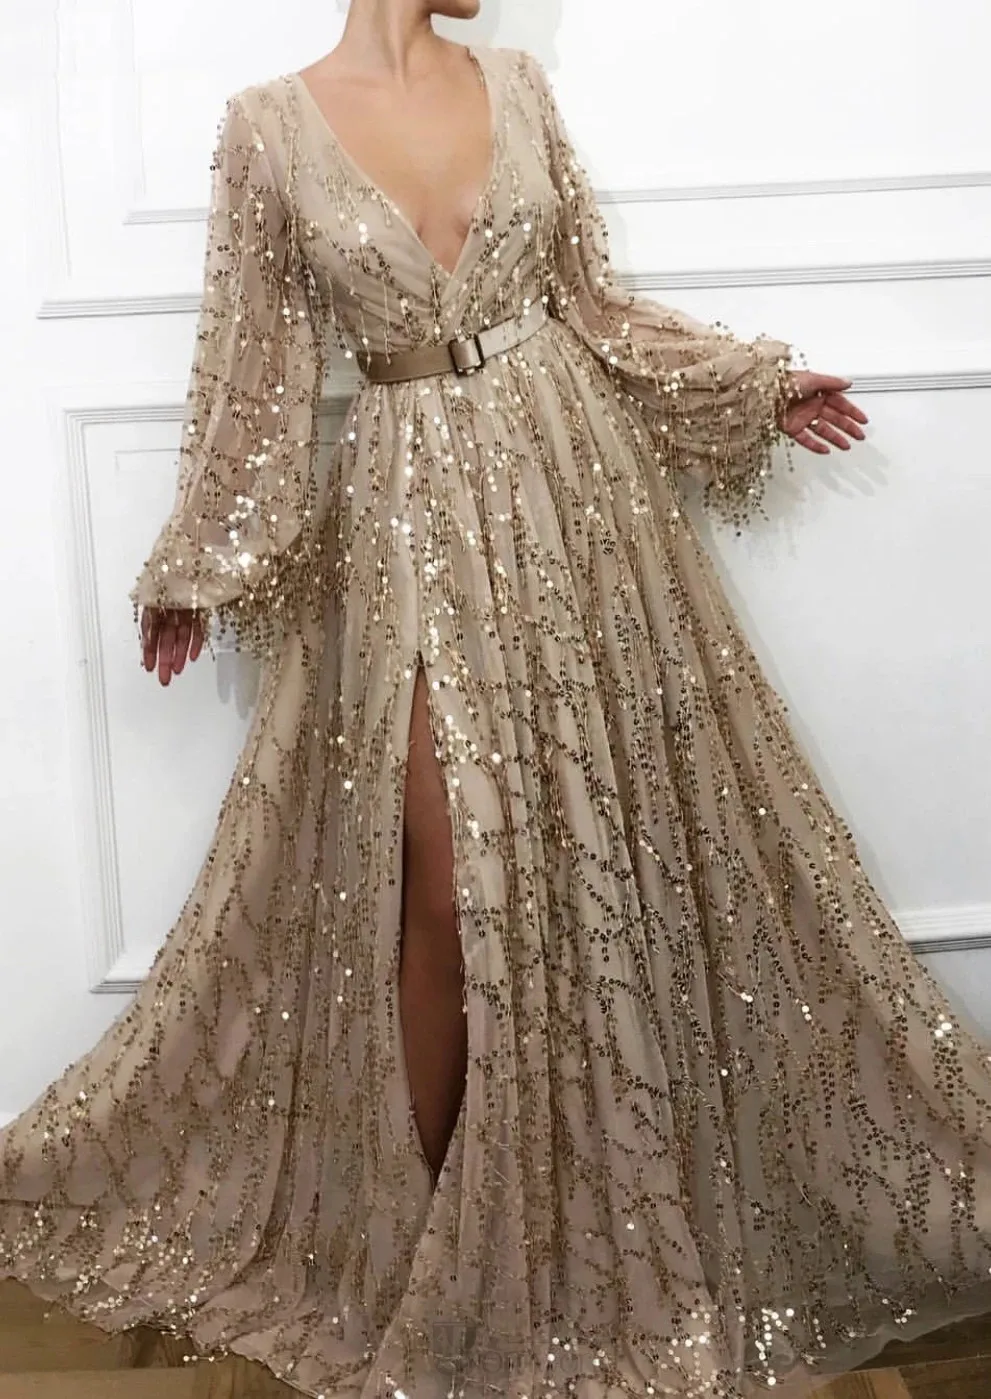 

Sexy Champagne Sequins Lace Evening Dresses 2022 Dubai Saudi Arabic Slit Prom Gowns Long Sleeves Formal Party Dress With Belt